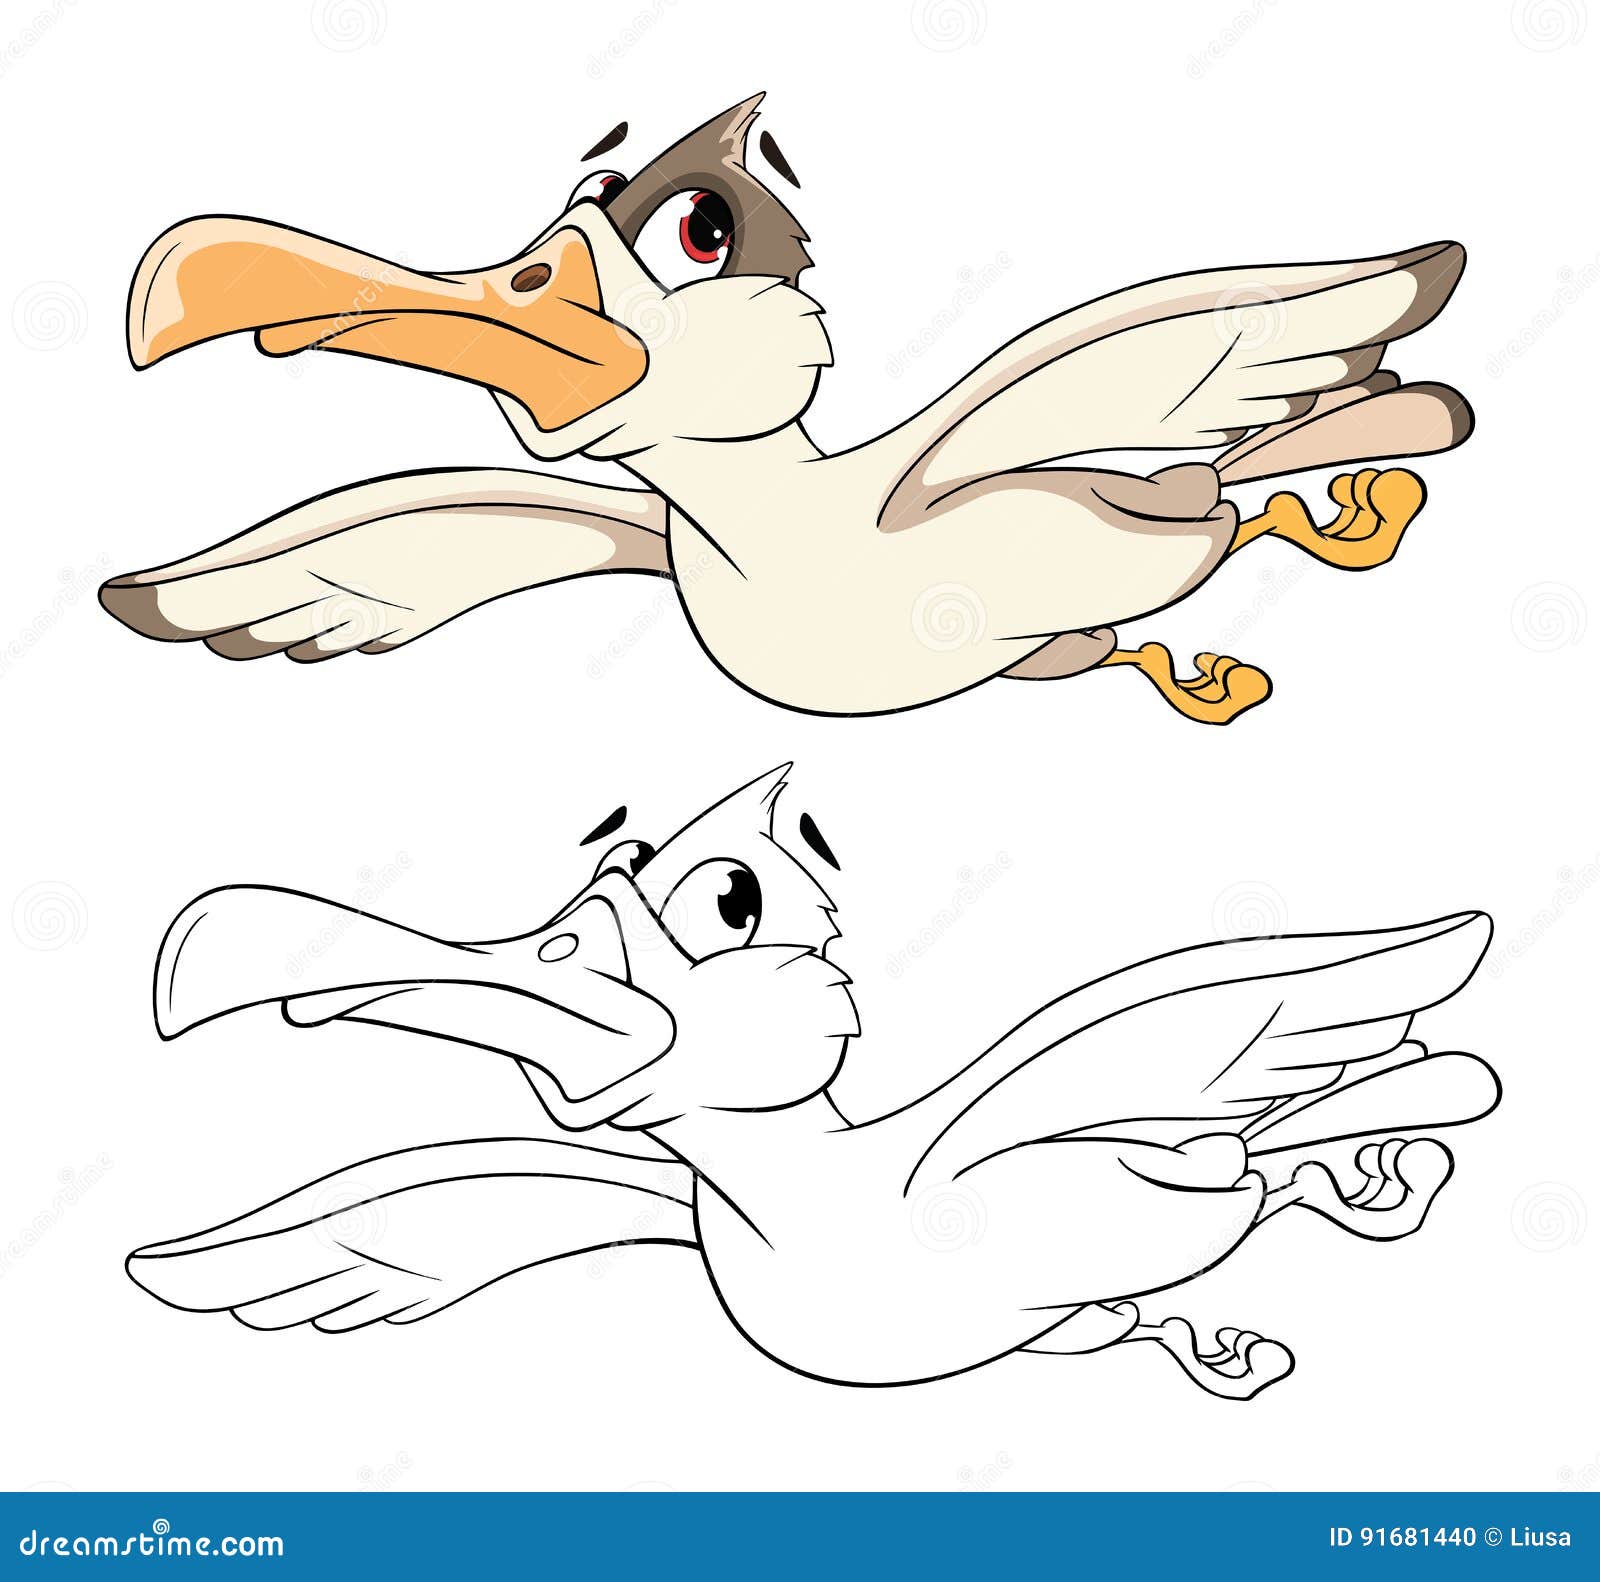 character sketch of the little seagull in the story 'His first flight' by  Liam O' Flaherty(for 8 marks)​ - Brainly.in